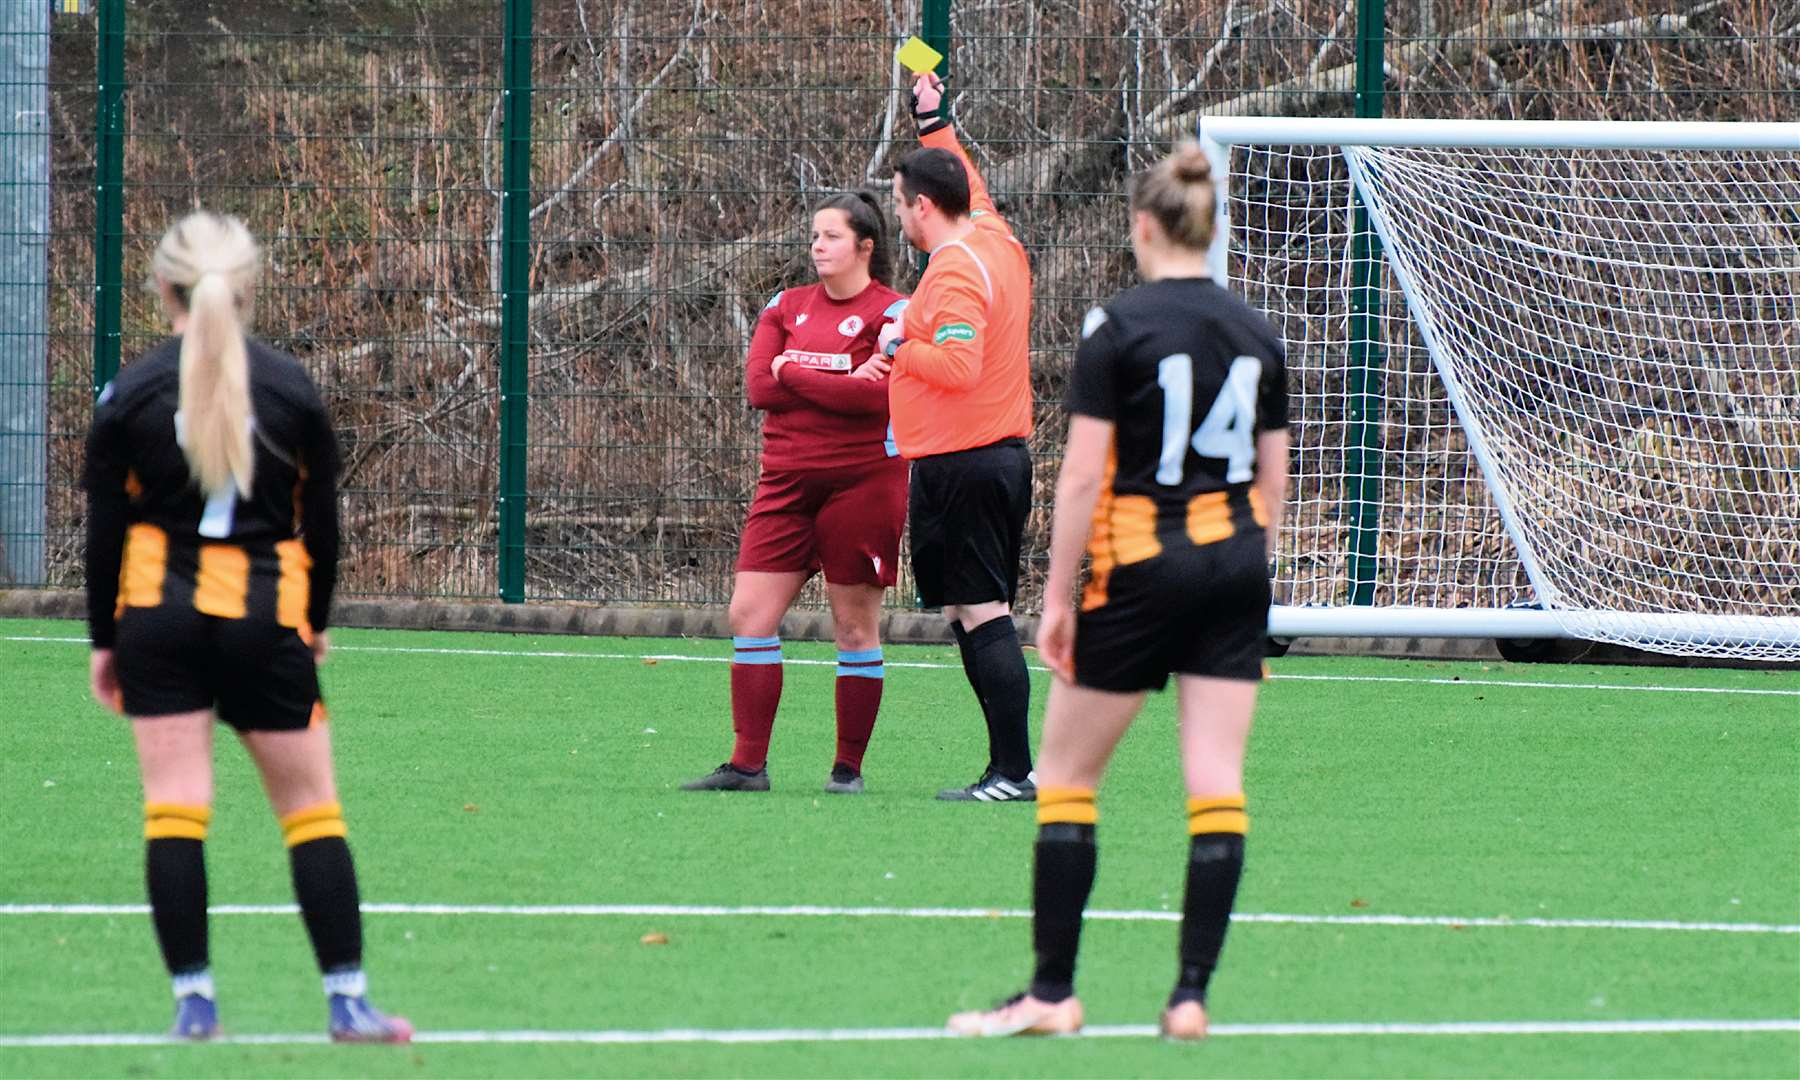 A yellow card is shown to Dryburgh, before red cards were dished out in the second half.